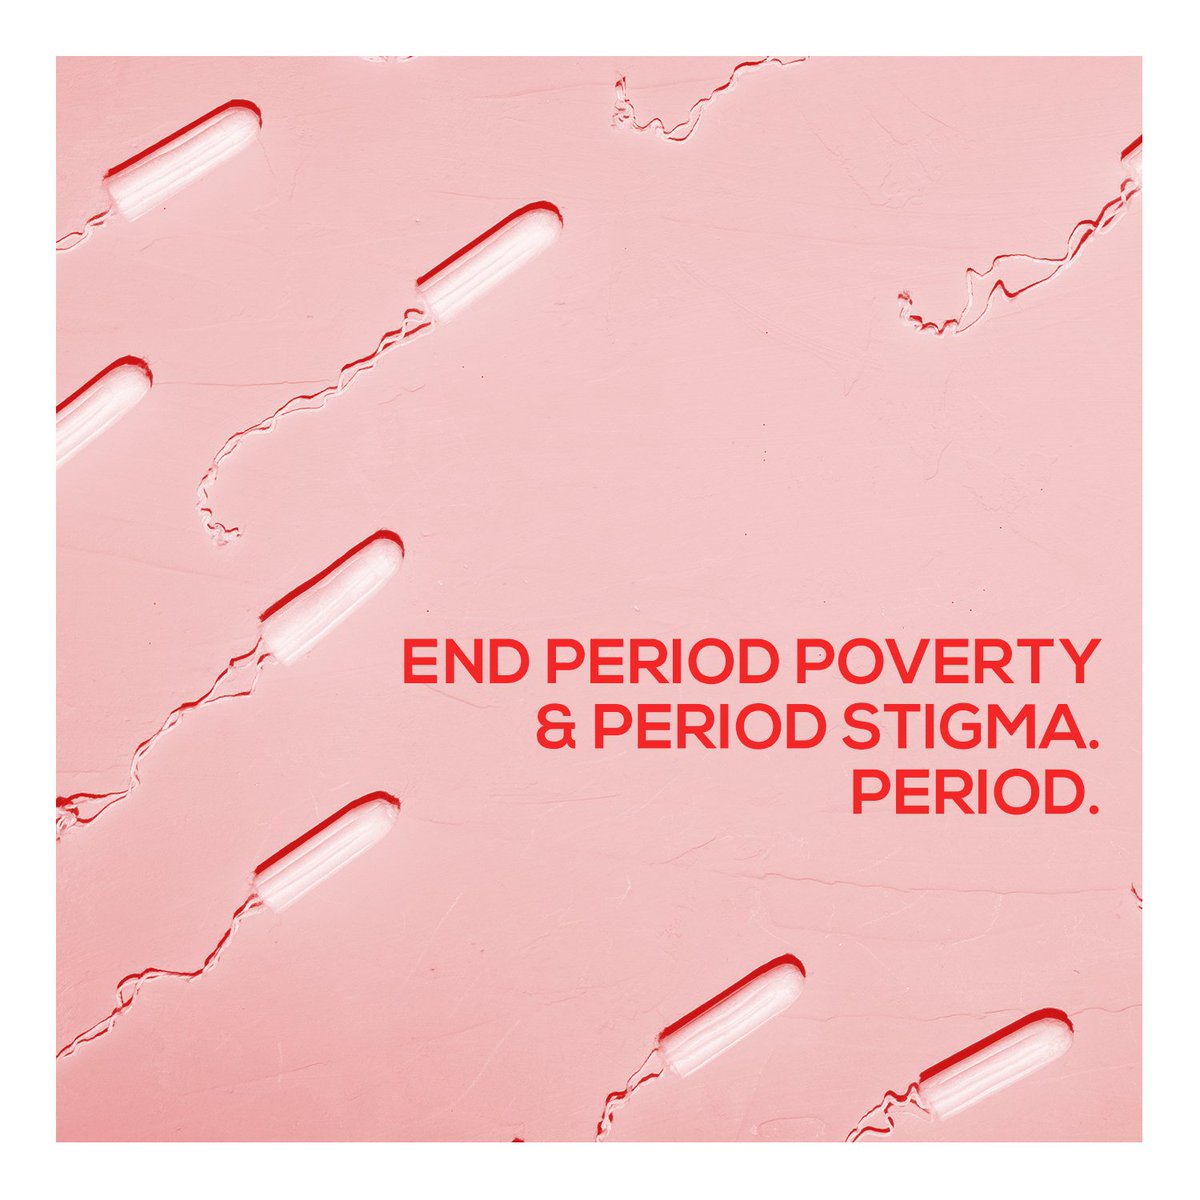 Having a period with dignity shouldn’t be a luxury -- it is a basic human right. 👊🏿

#WinstonDuke #HeForShe #endperiodpoverty #equalrights #humanrights #periodpower #menstrualmovement #endthestigma